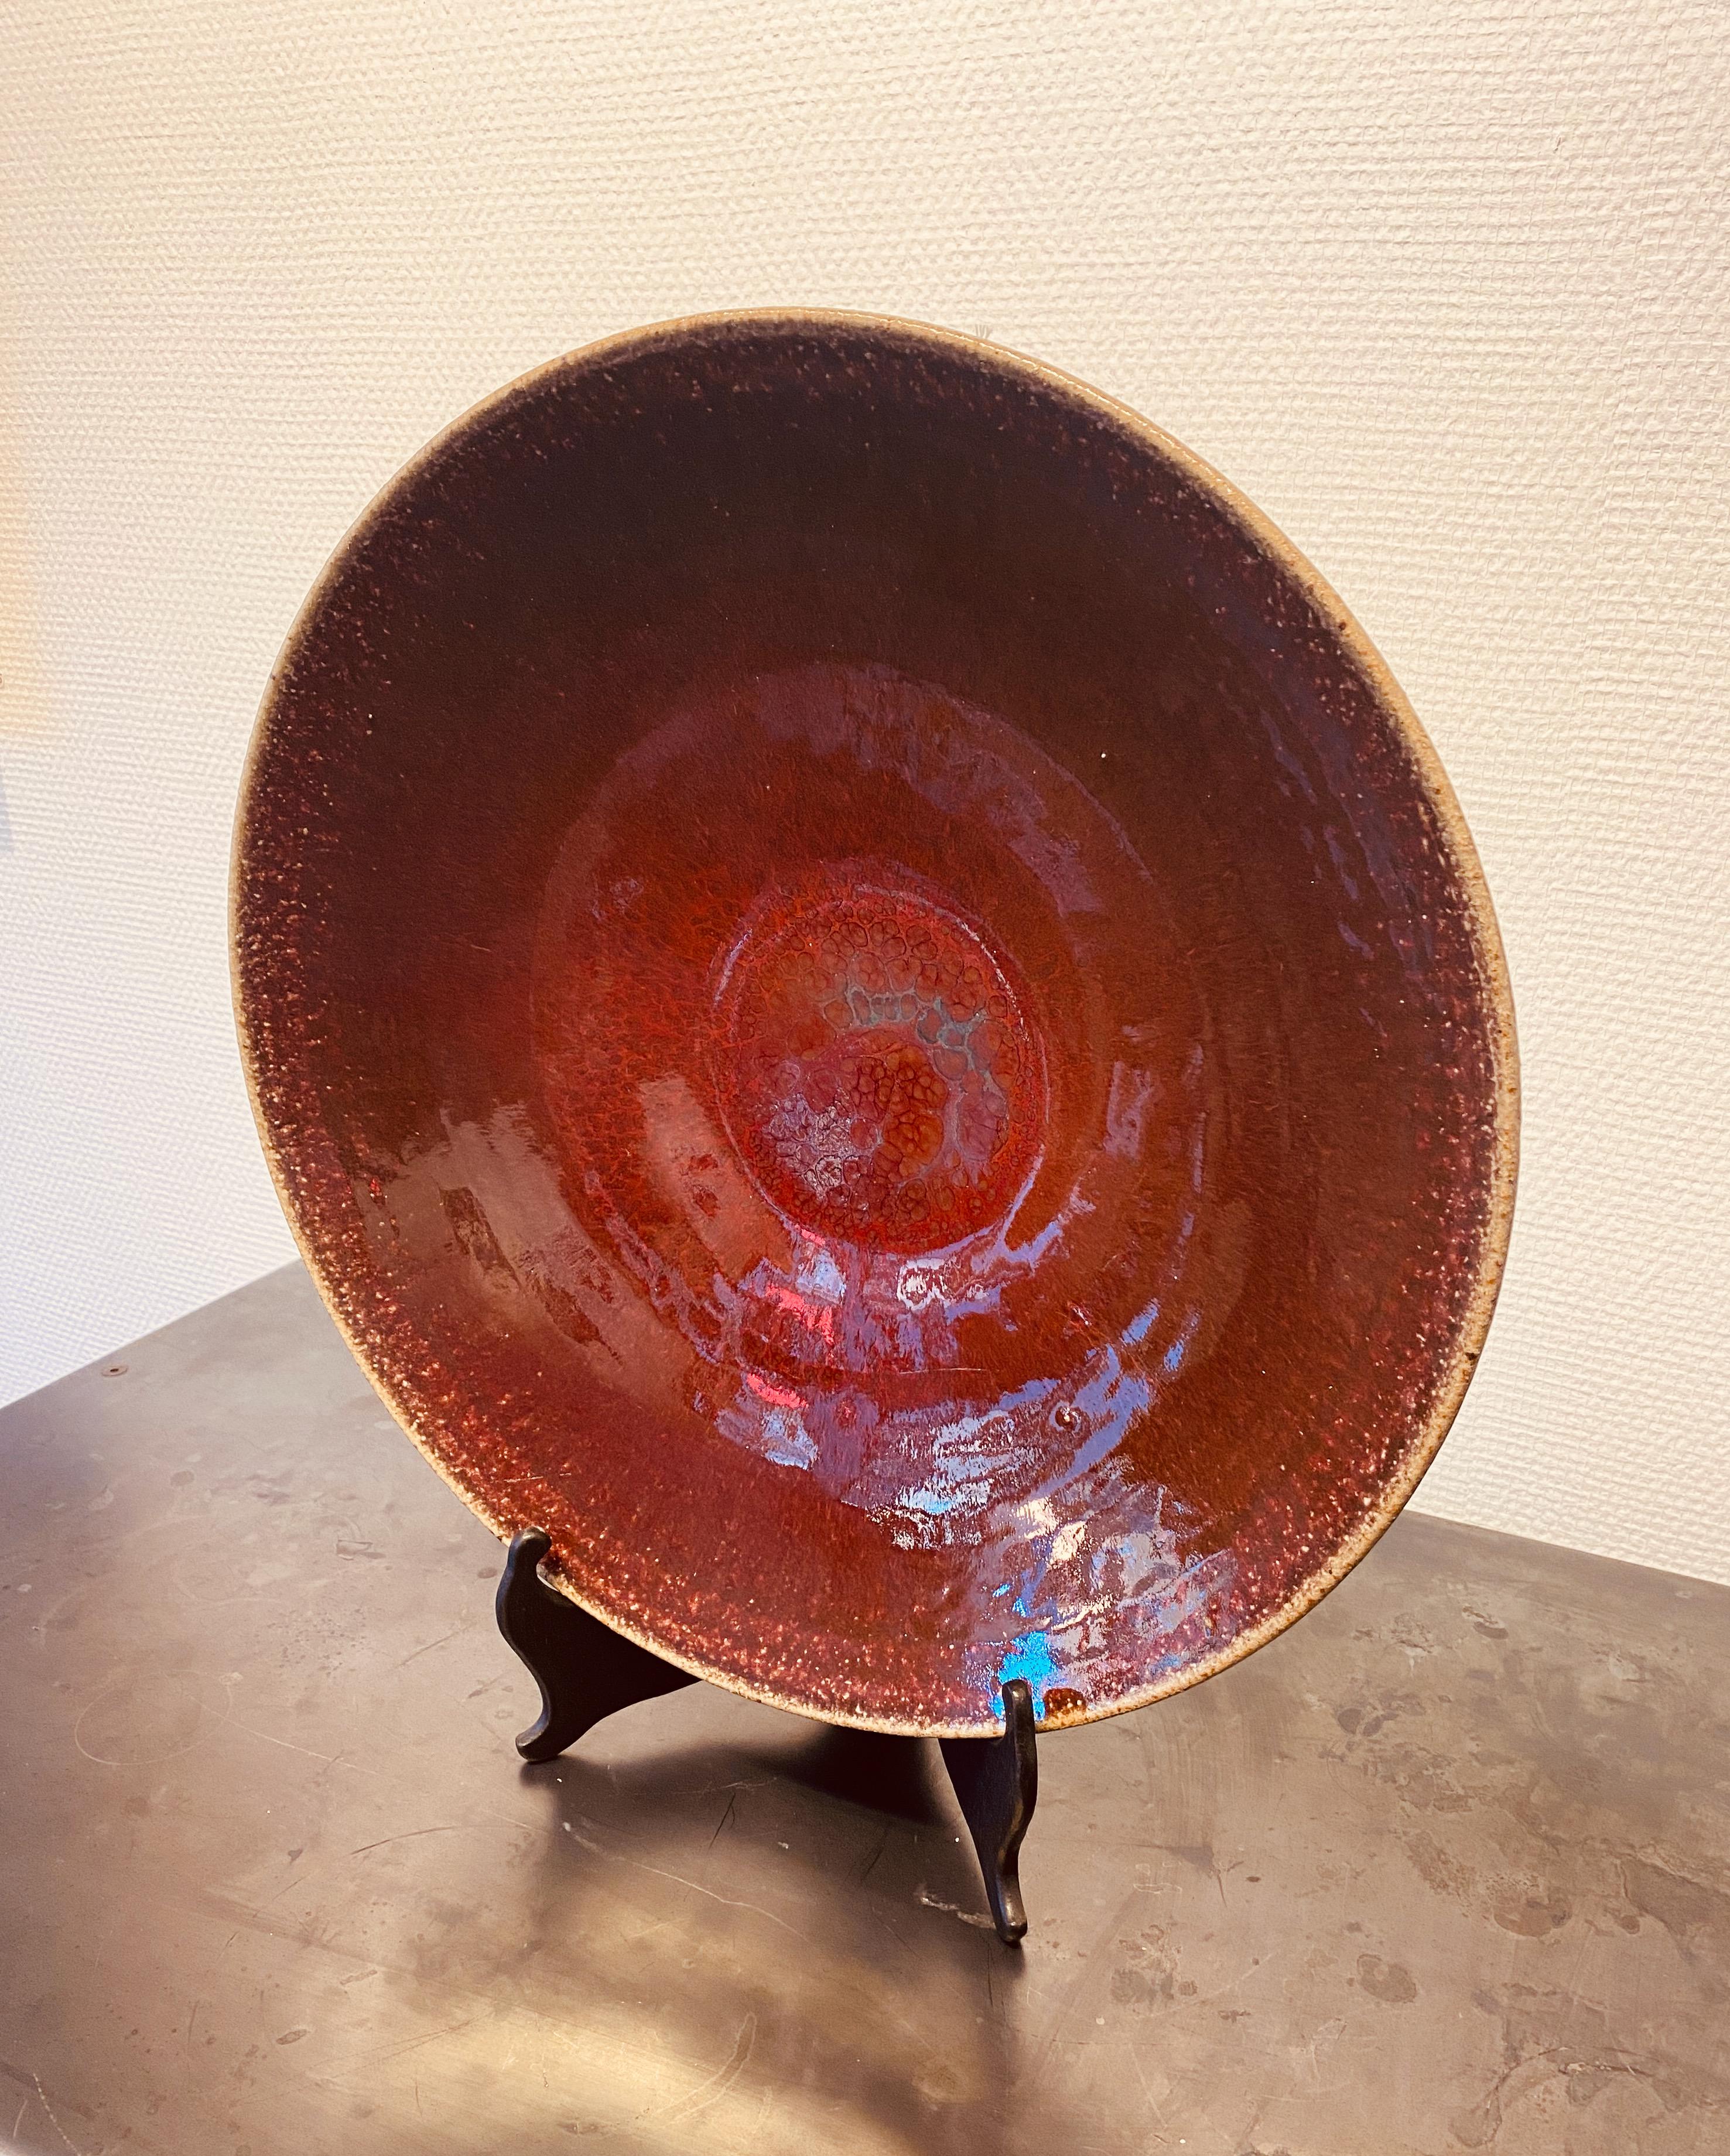 Beautiful fruit bowl in a sangre-de-toro glaze by Swedish ceramist couple Gustav and Ulla Kraitz. Normal signs of use. No chips or cracks.

Gustav Kraitz fled his native Hungary in 1956 and finally came to Sweden where he met Ulla in 1960. After